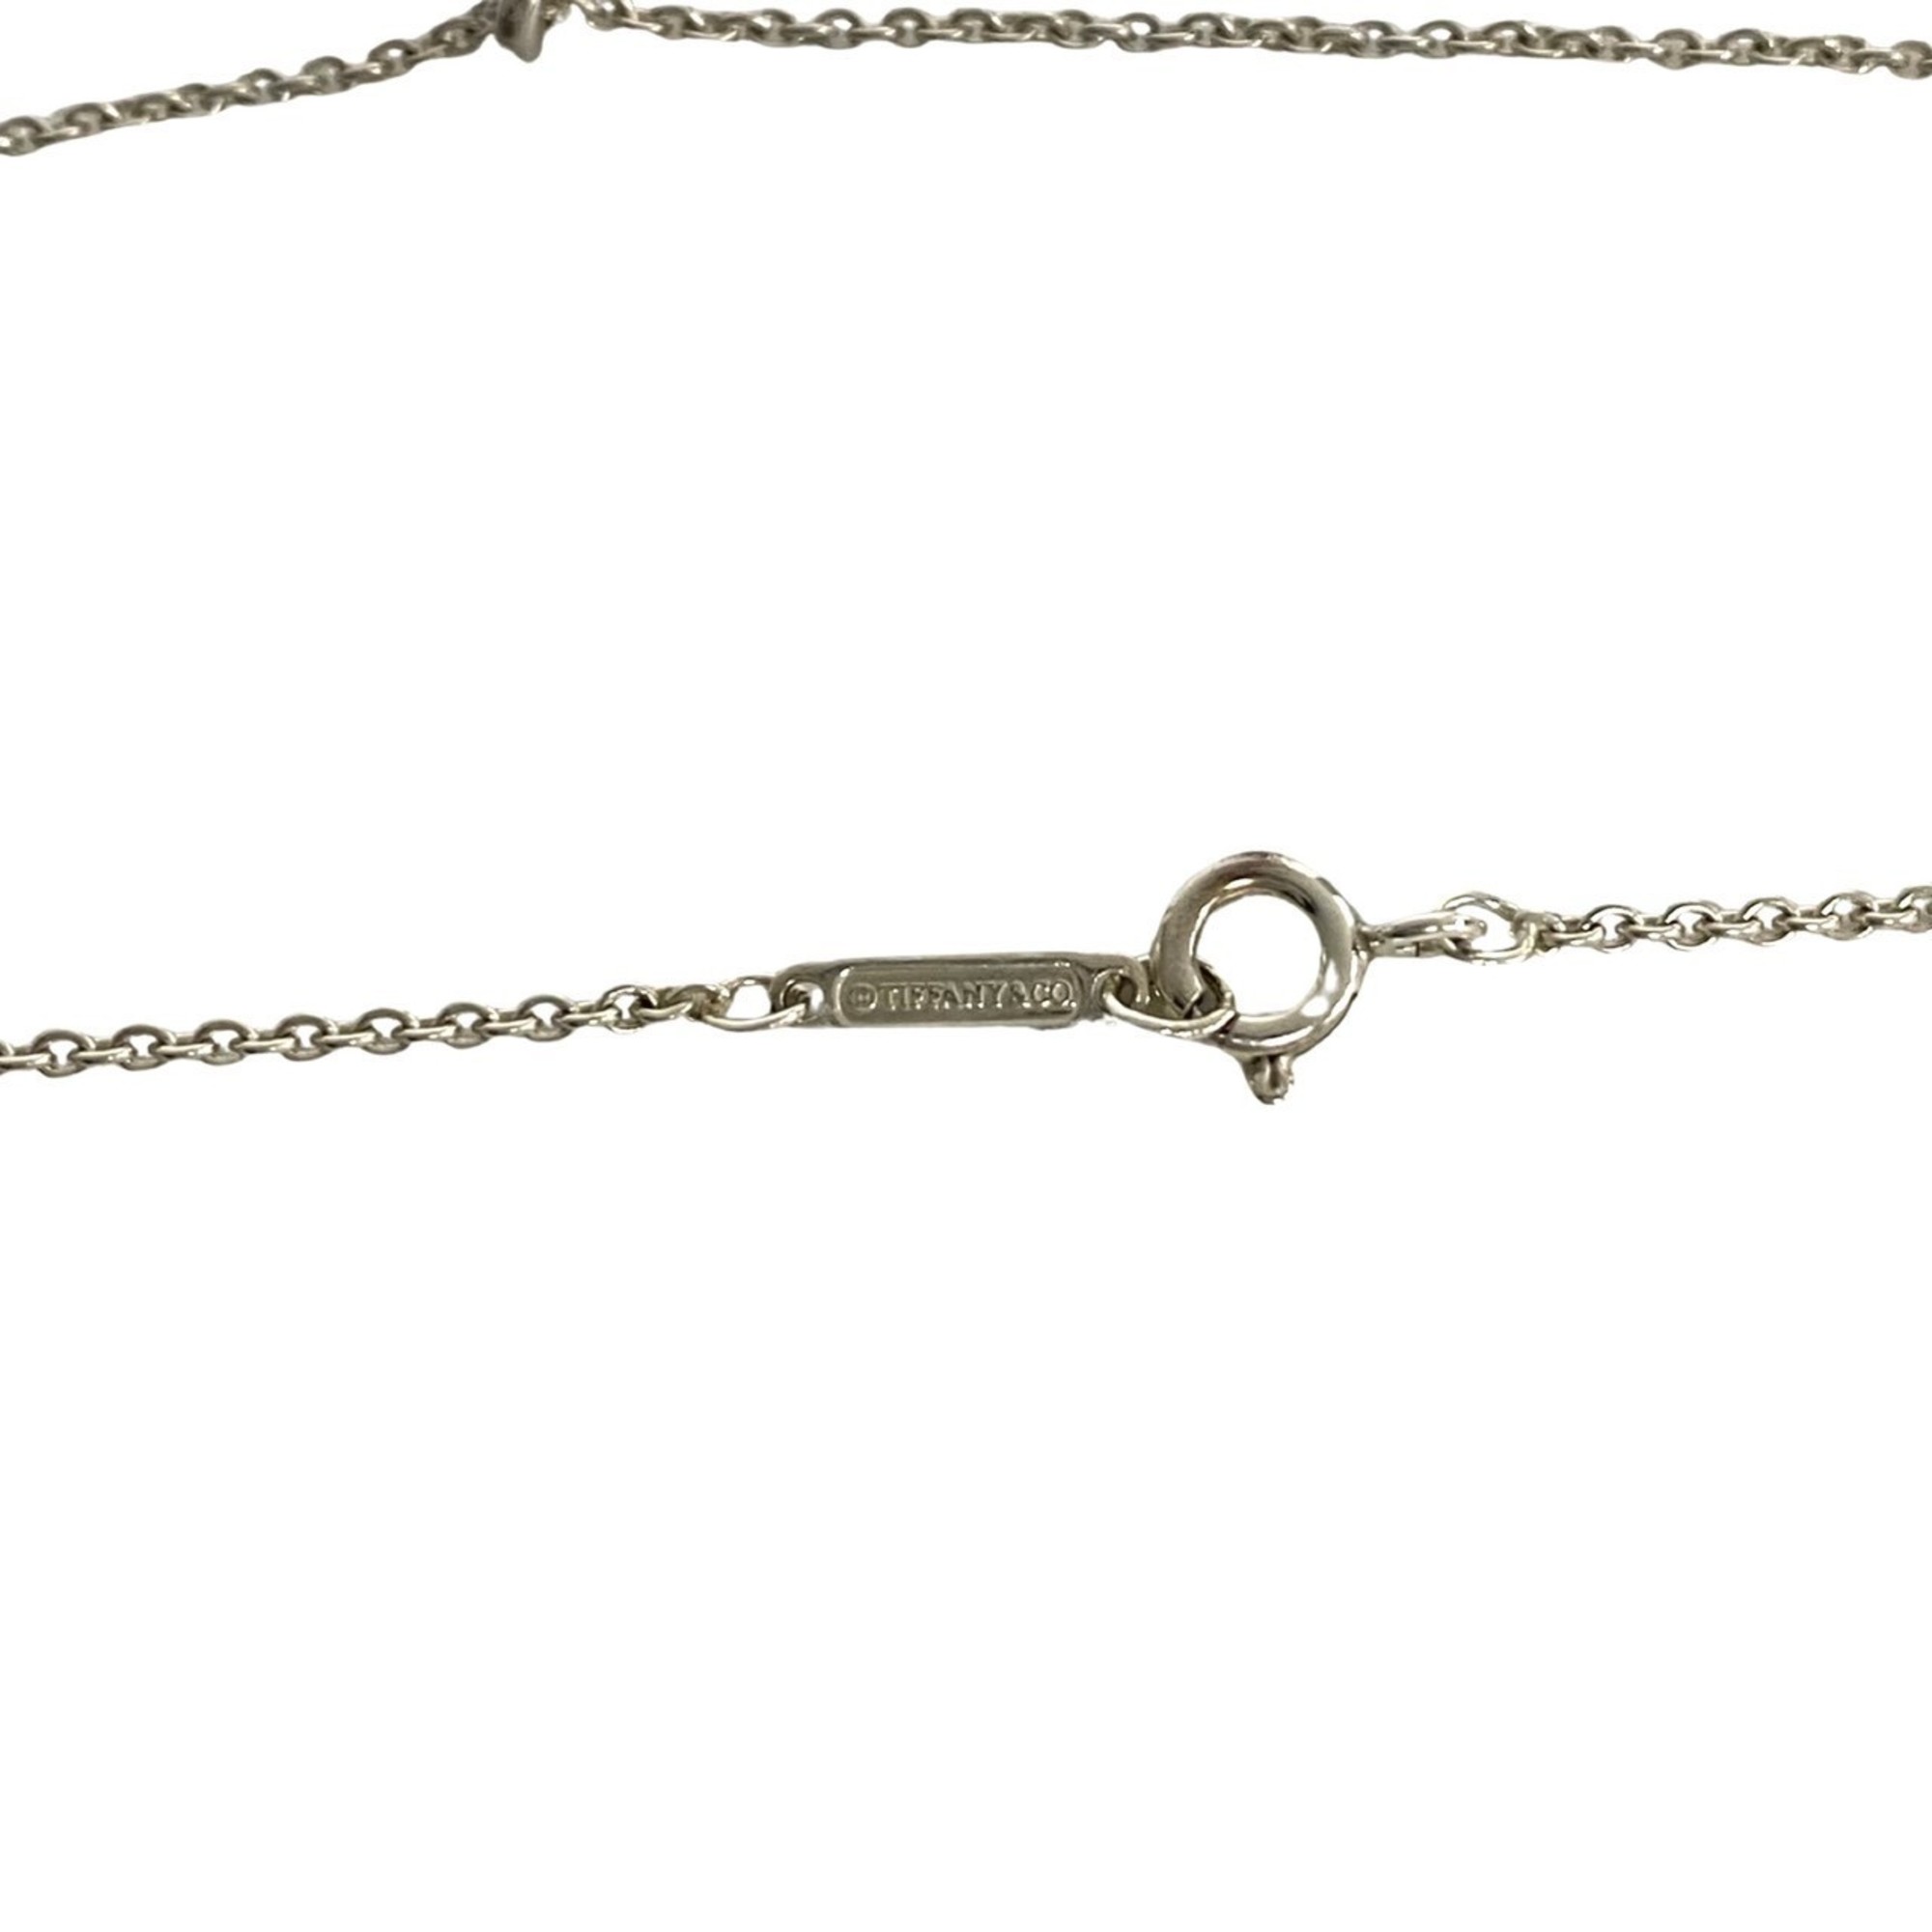 TIFFANY&Co. Tiffany T&CO 1837 engraved silver 925 necklace pendant for women, 27395